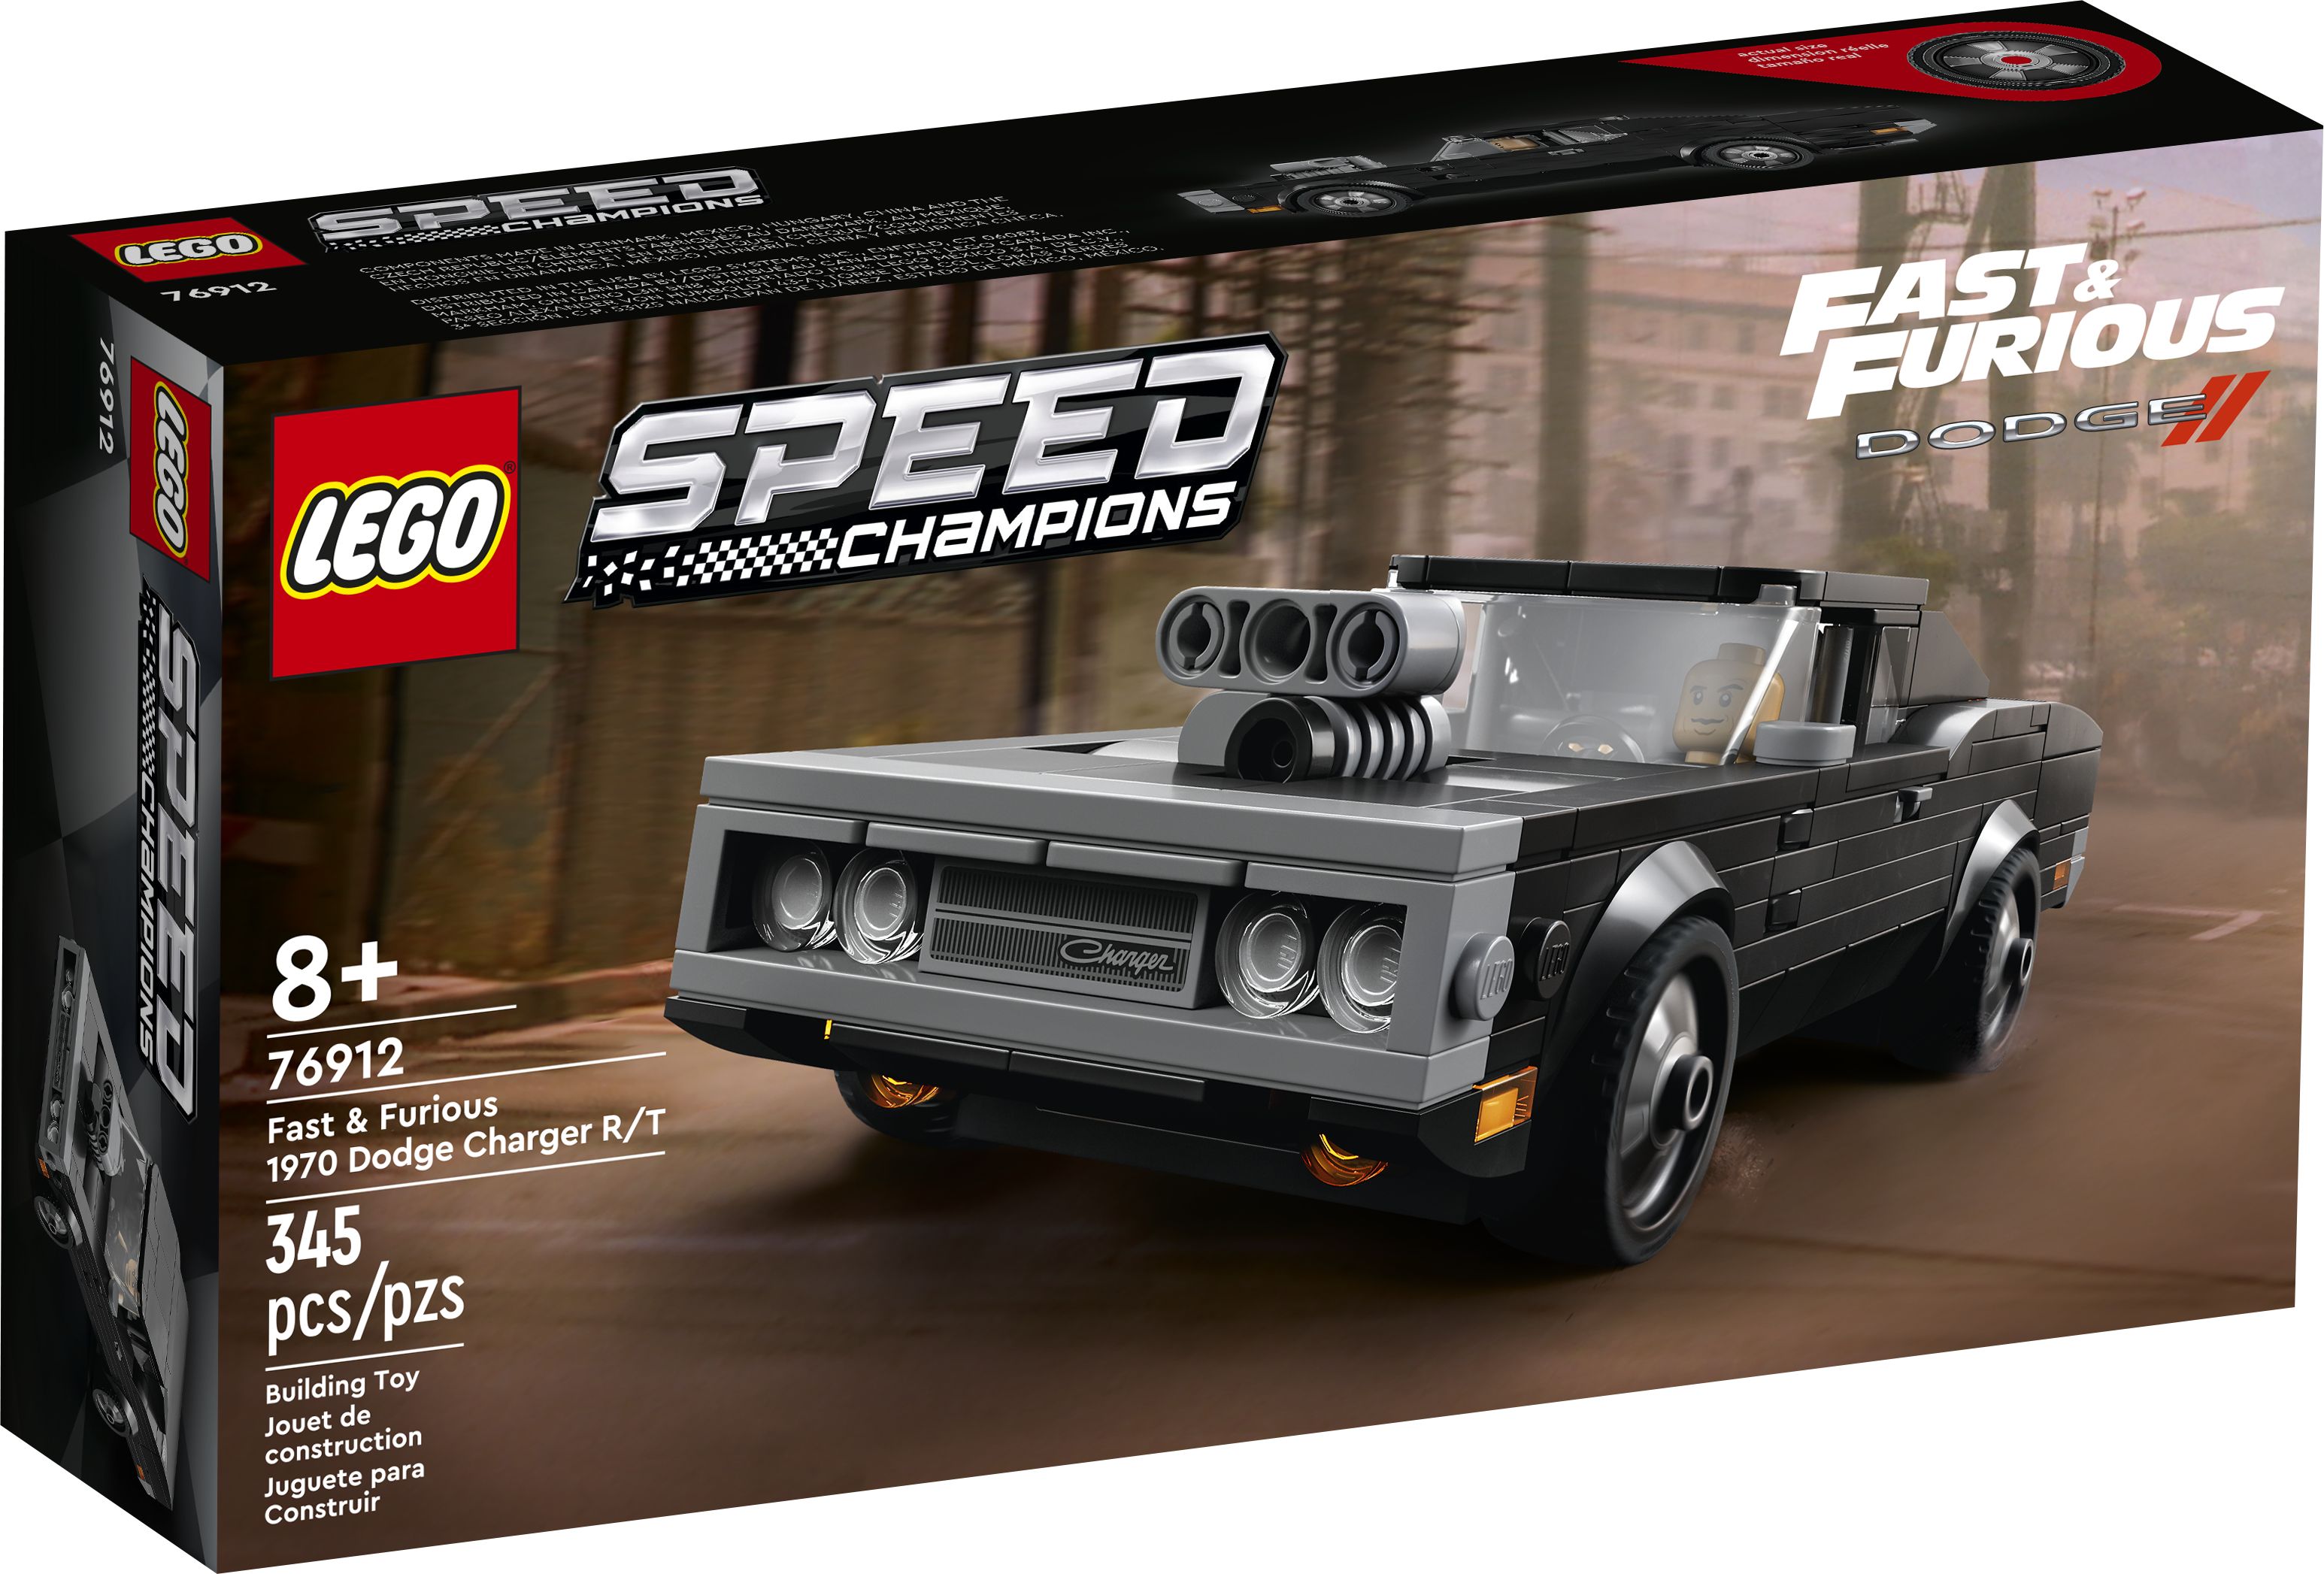 LEGO Speed Champions 76912 Fast & Furious 1970 Dodge Charger R/T LEGO_76912_Box1_v39.jpg